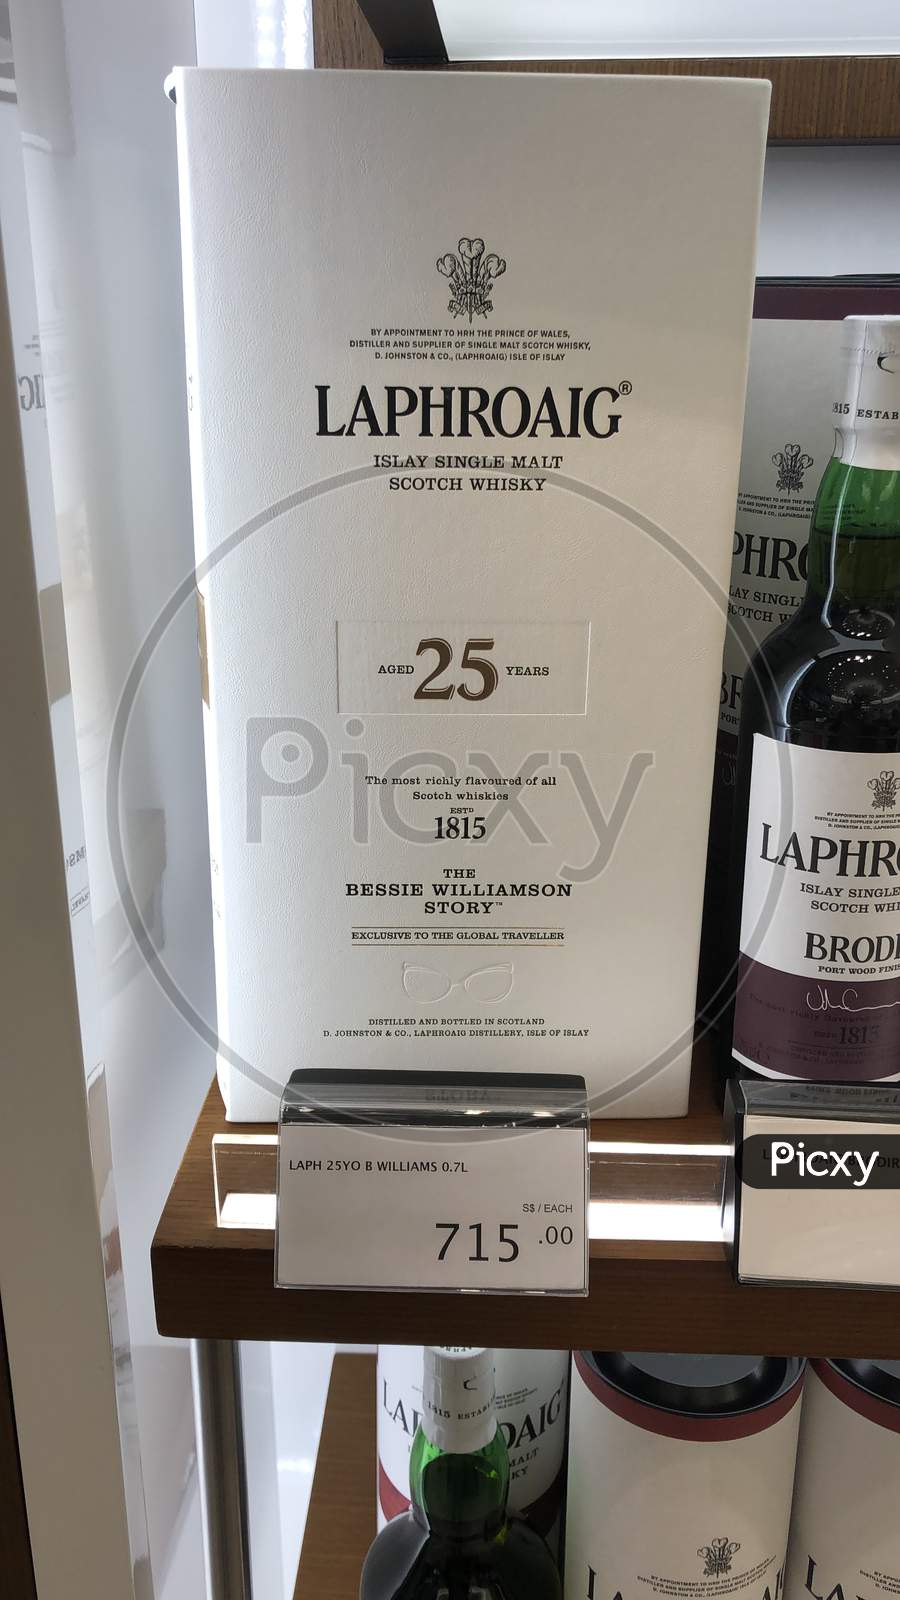 Laphroaig 25 Years bottle at Singapore airport duty free.